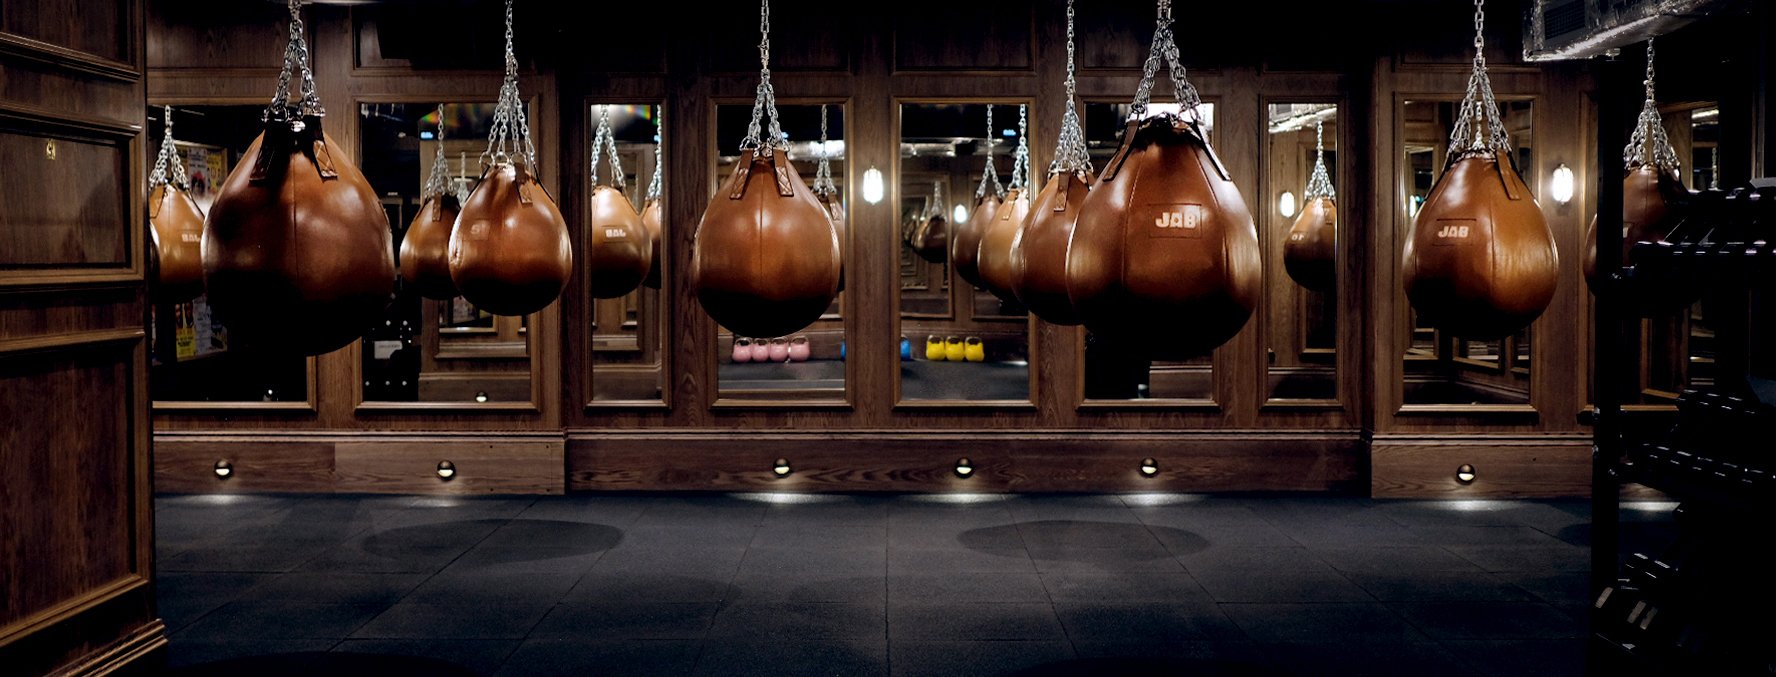 JAB Boxing's wood clad and mirrored boxing studio with brown leather punch bags hanging from the ceiling